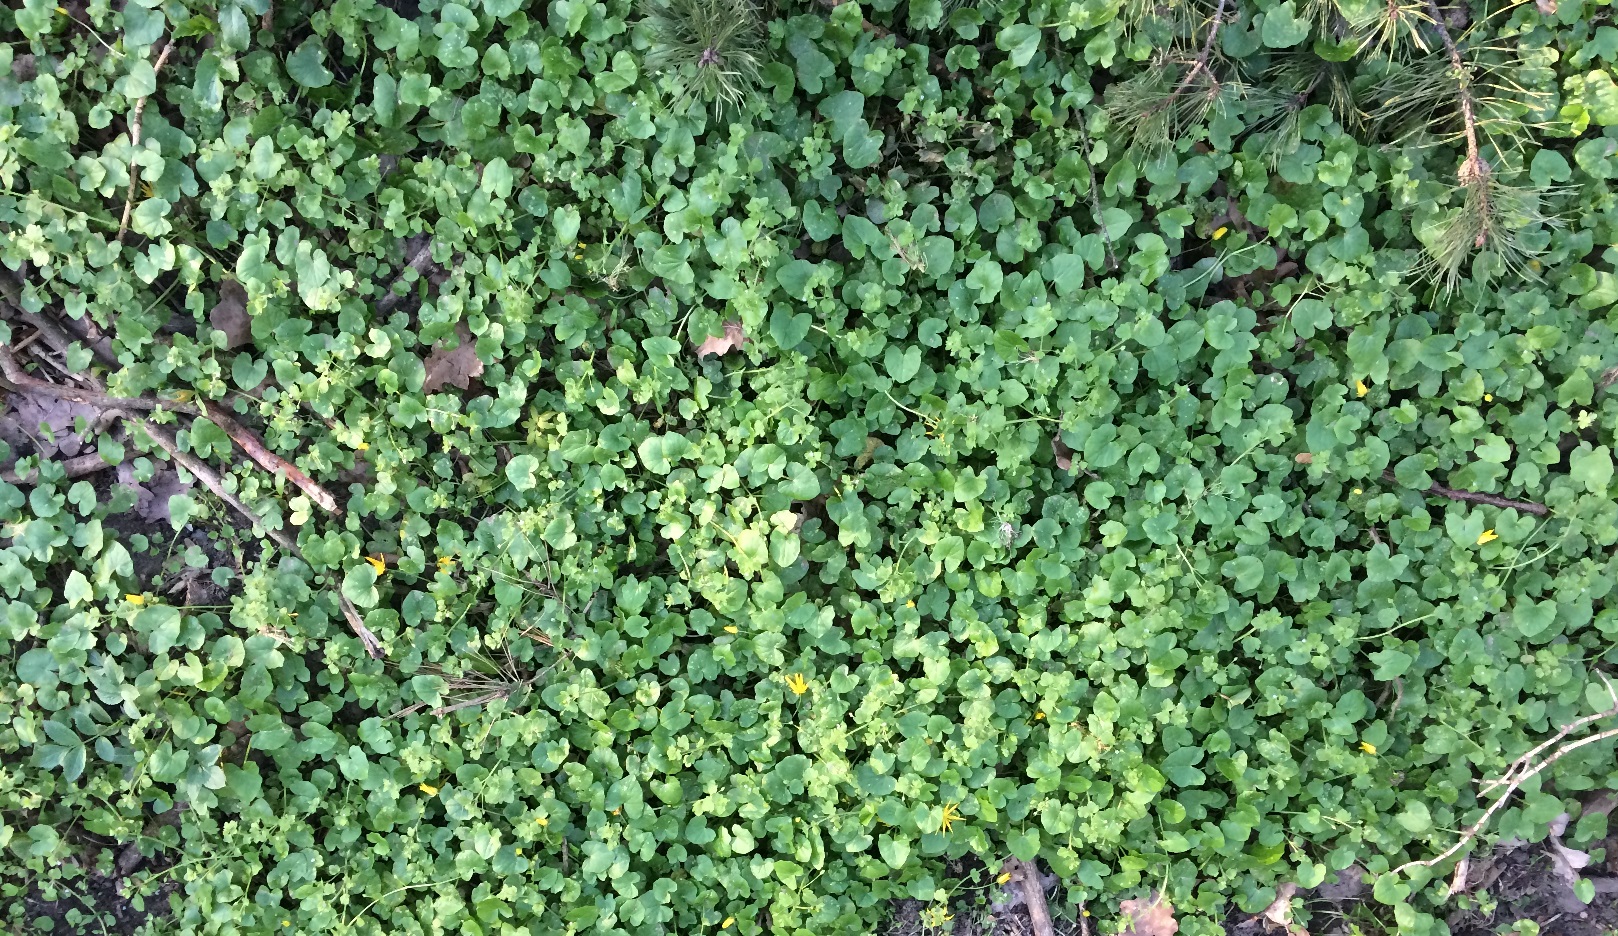 lots of clovers from above